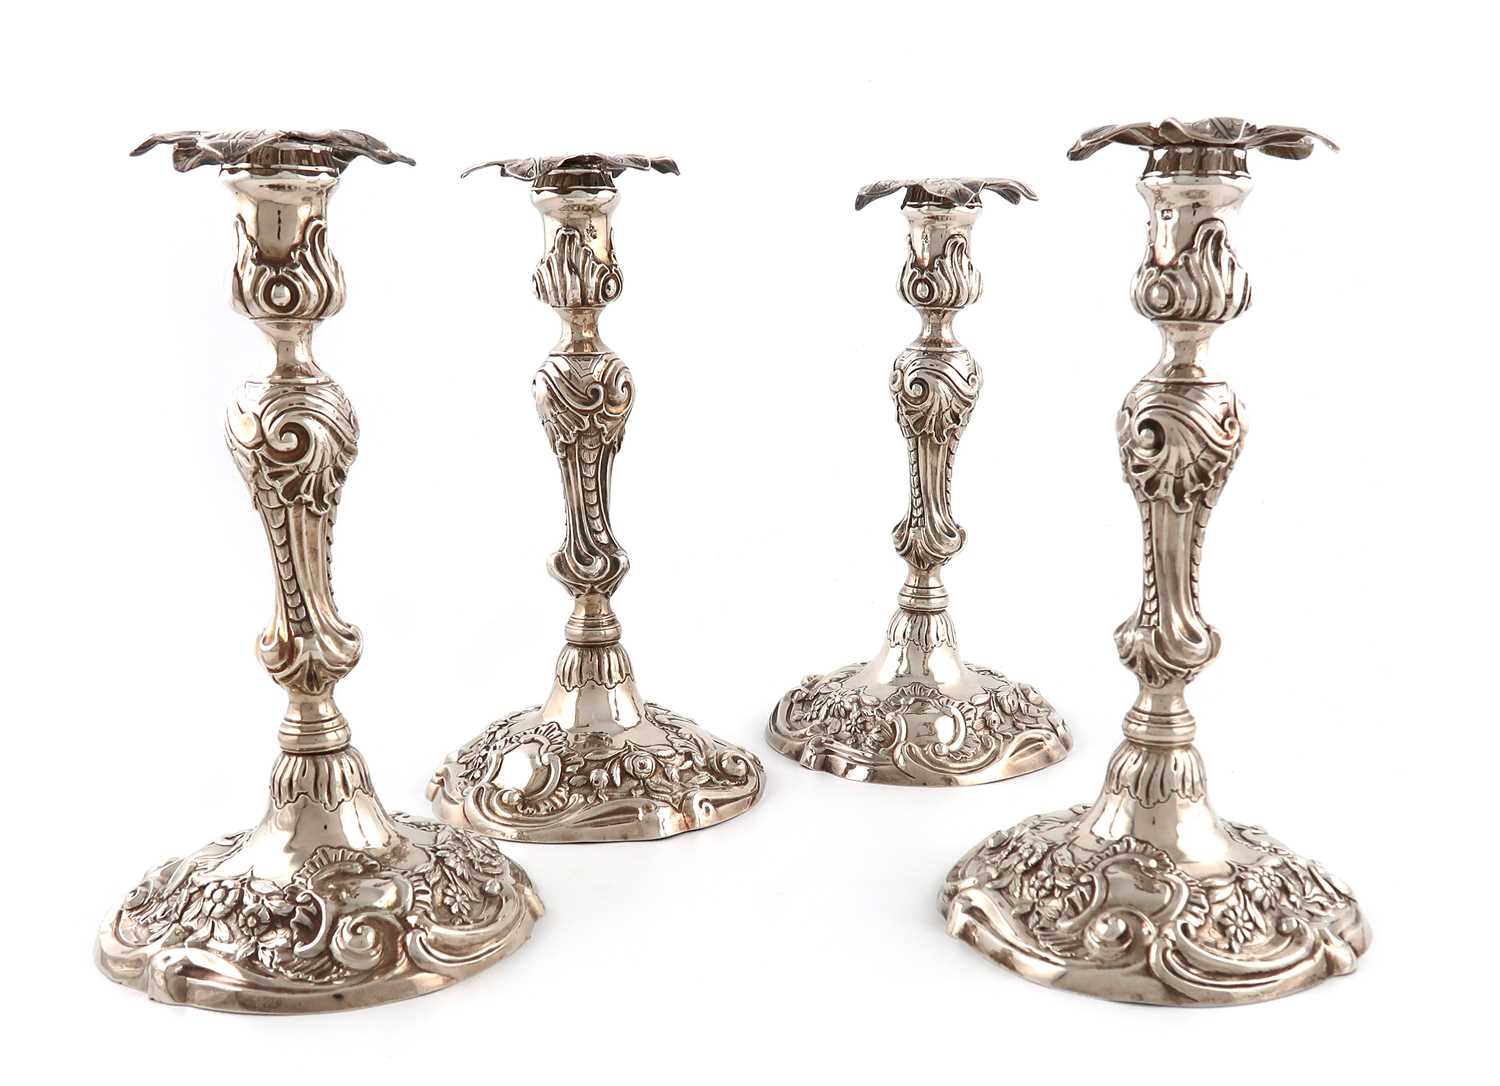 A set of four George II silver candlesticks,by William Cafe, London 1758,baluster stems with shell